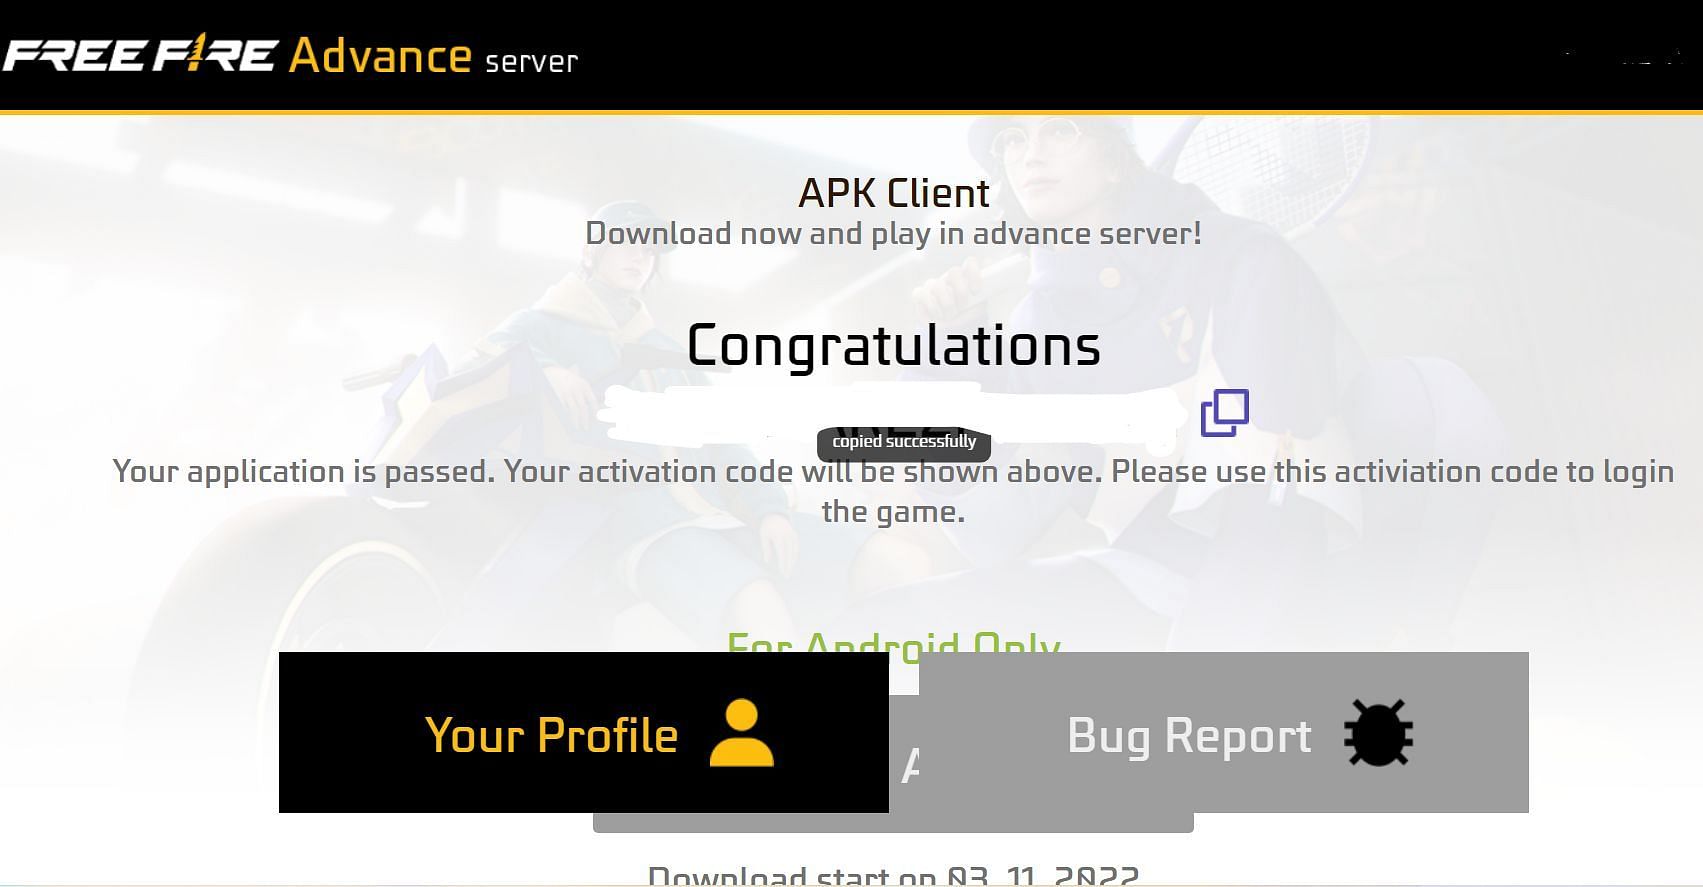 Activation Code is like the key to APK Client as, without it, Advance Server will remain locked (Image via Garena)